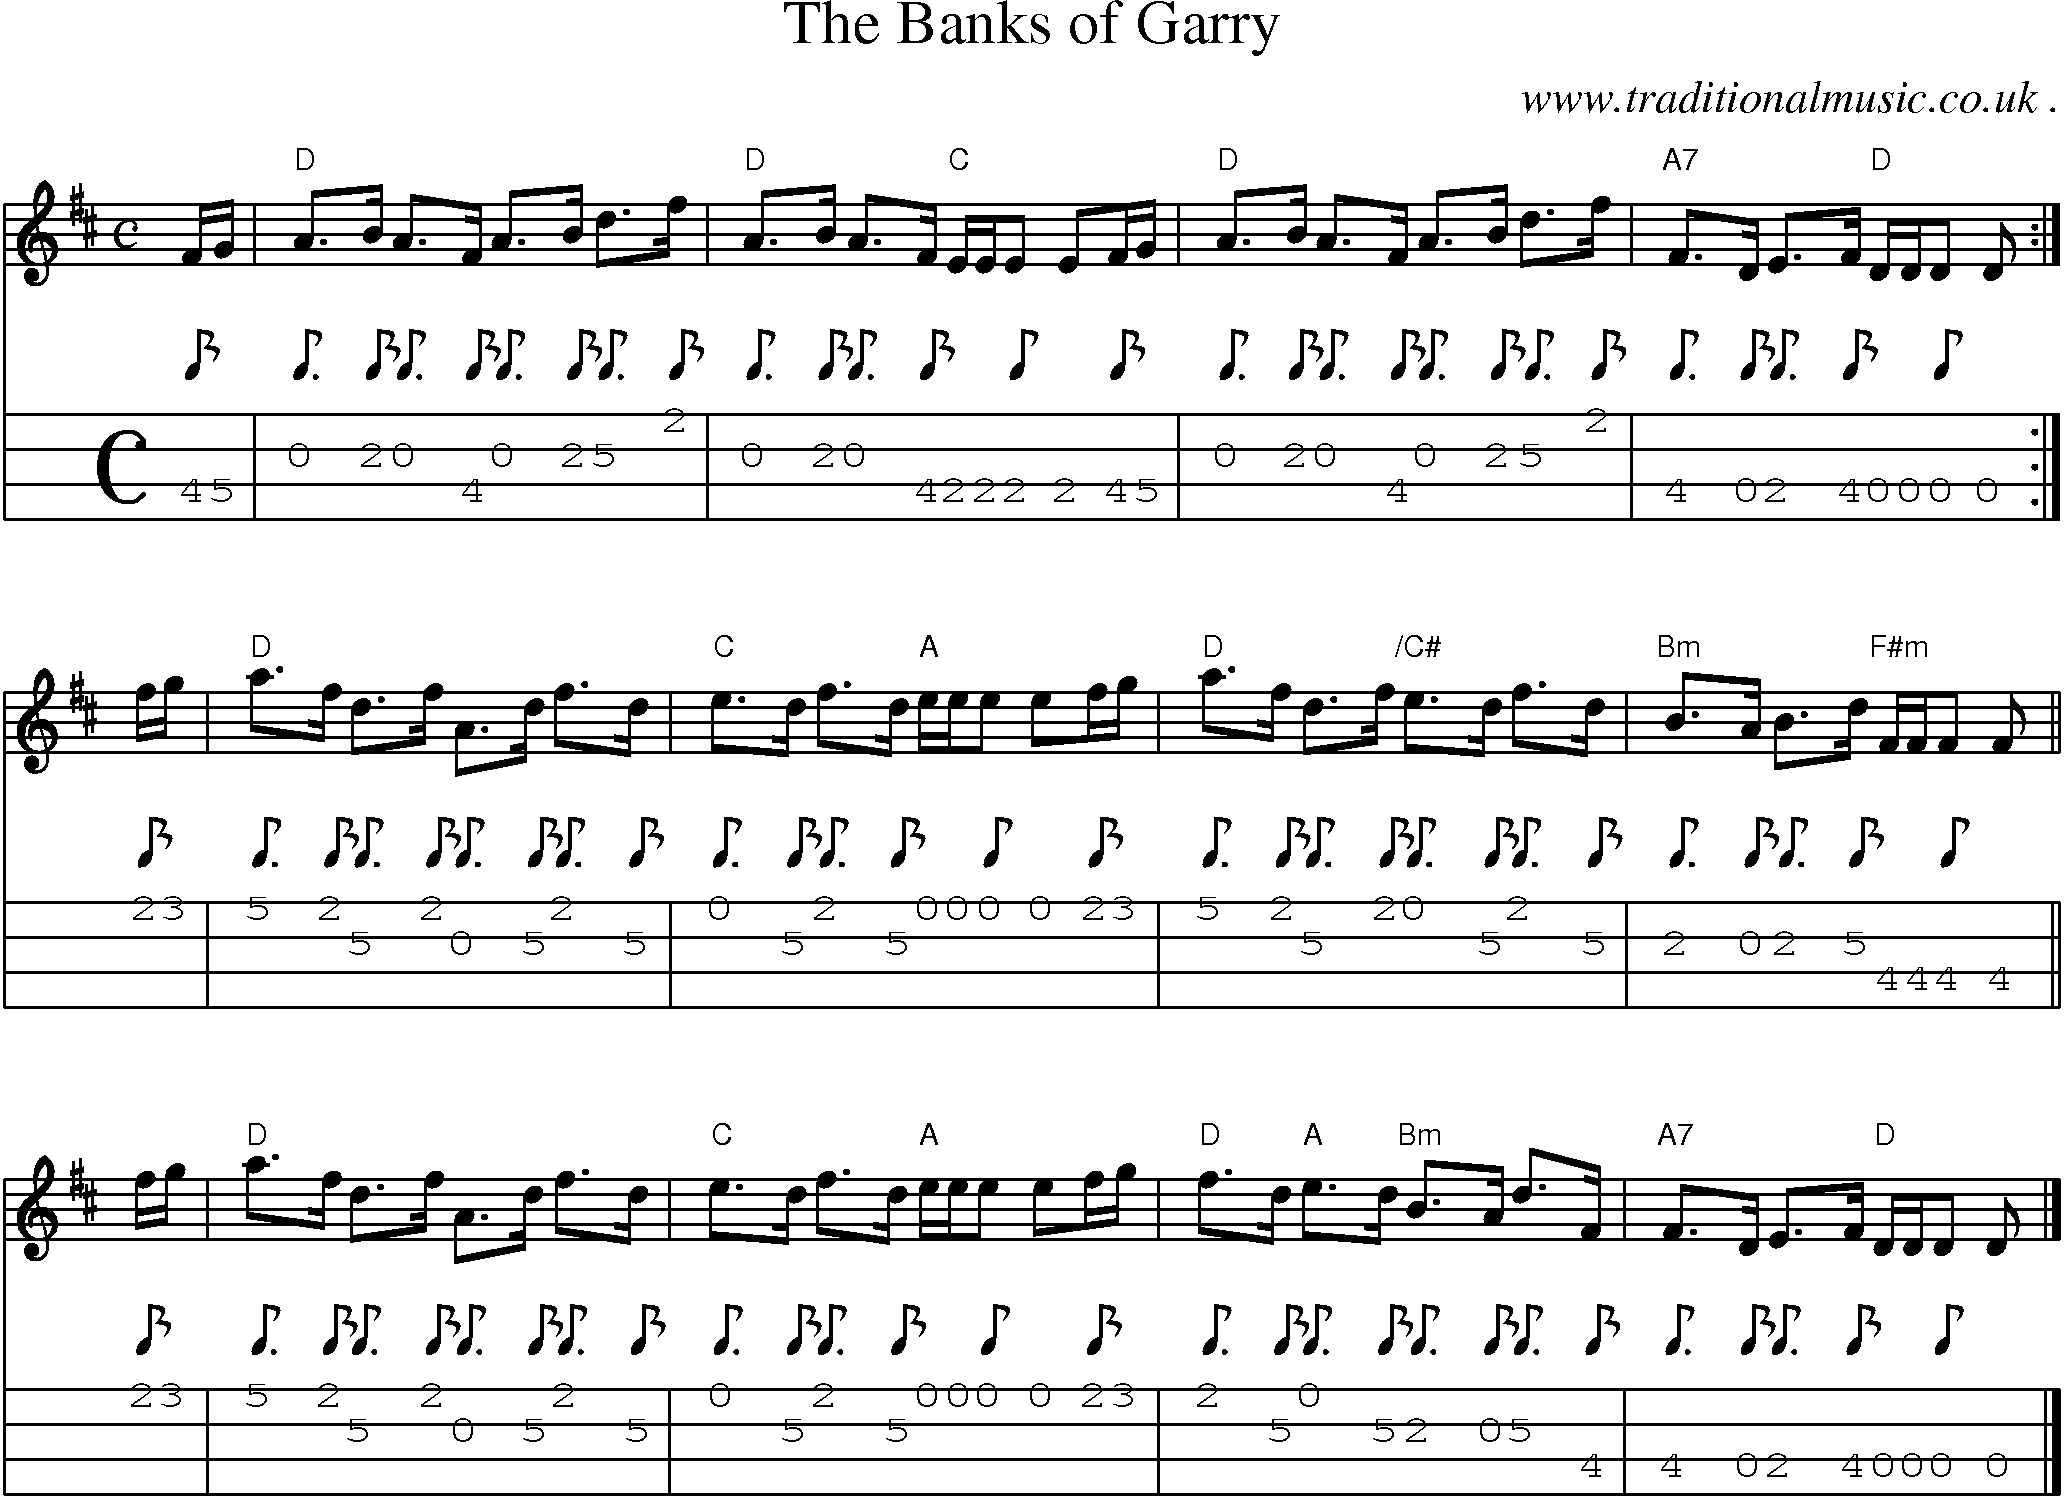 Sheet-music  score, Chords and Mandolin Tabs for The Banks Of Garry